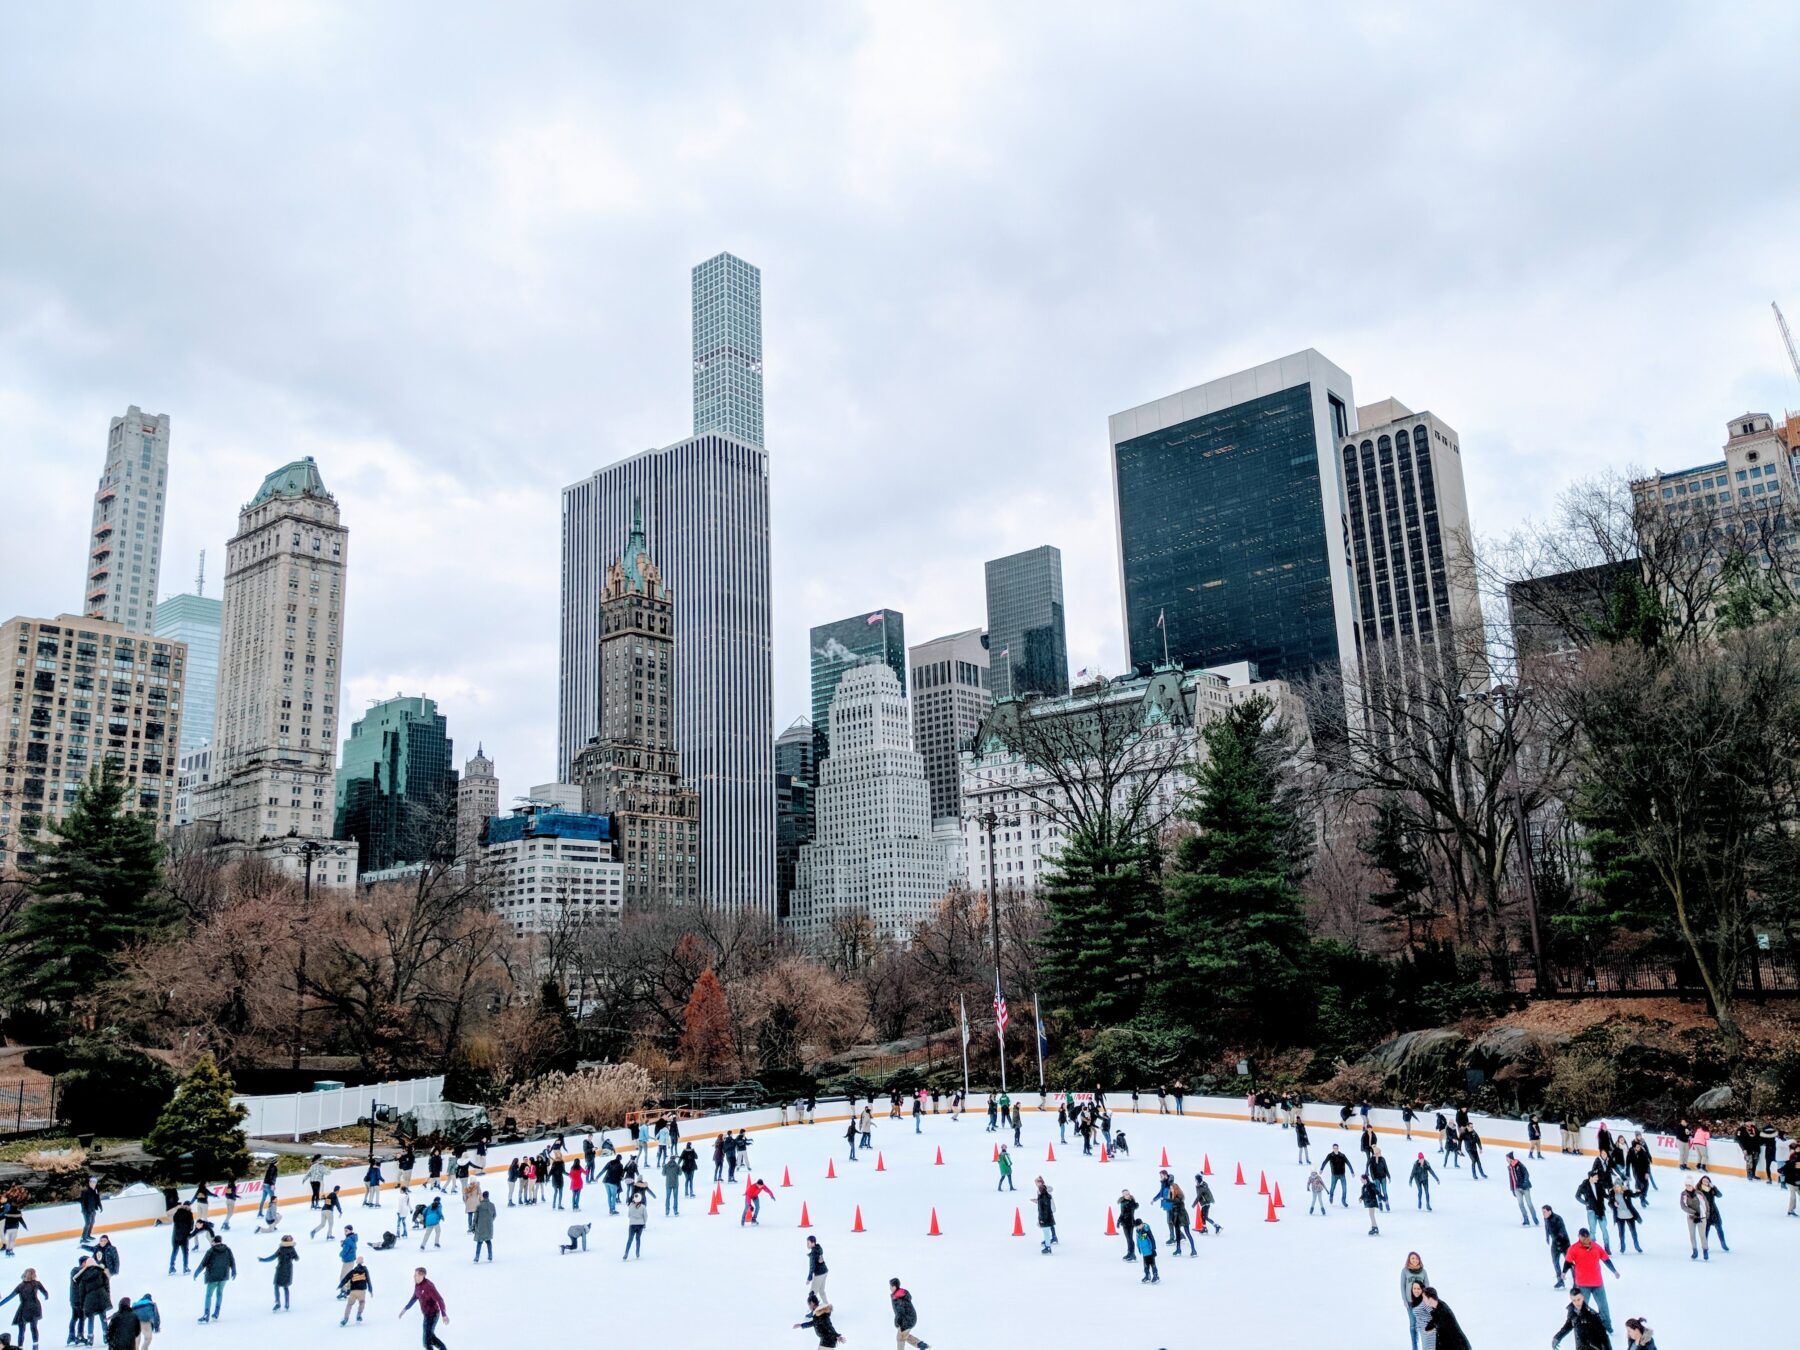 view from Wollman rink